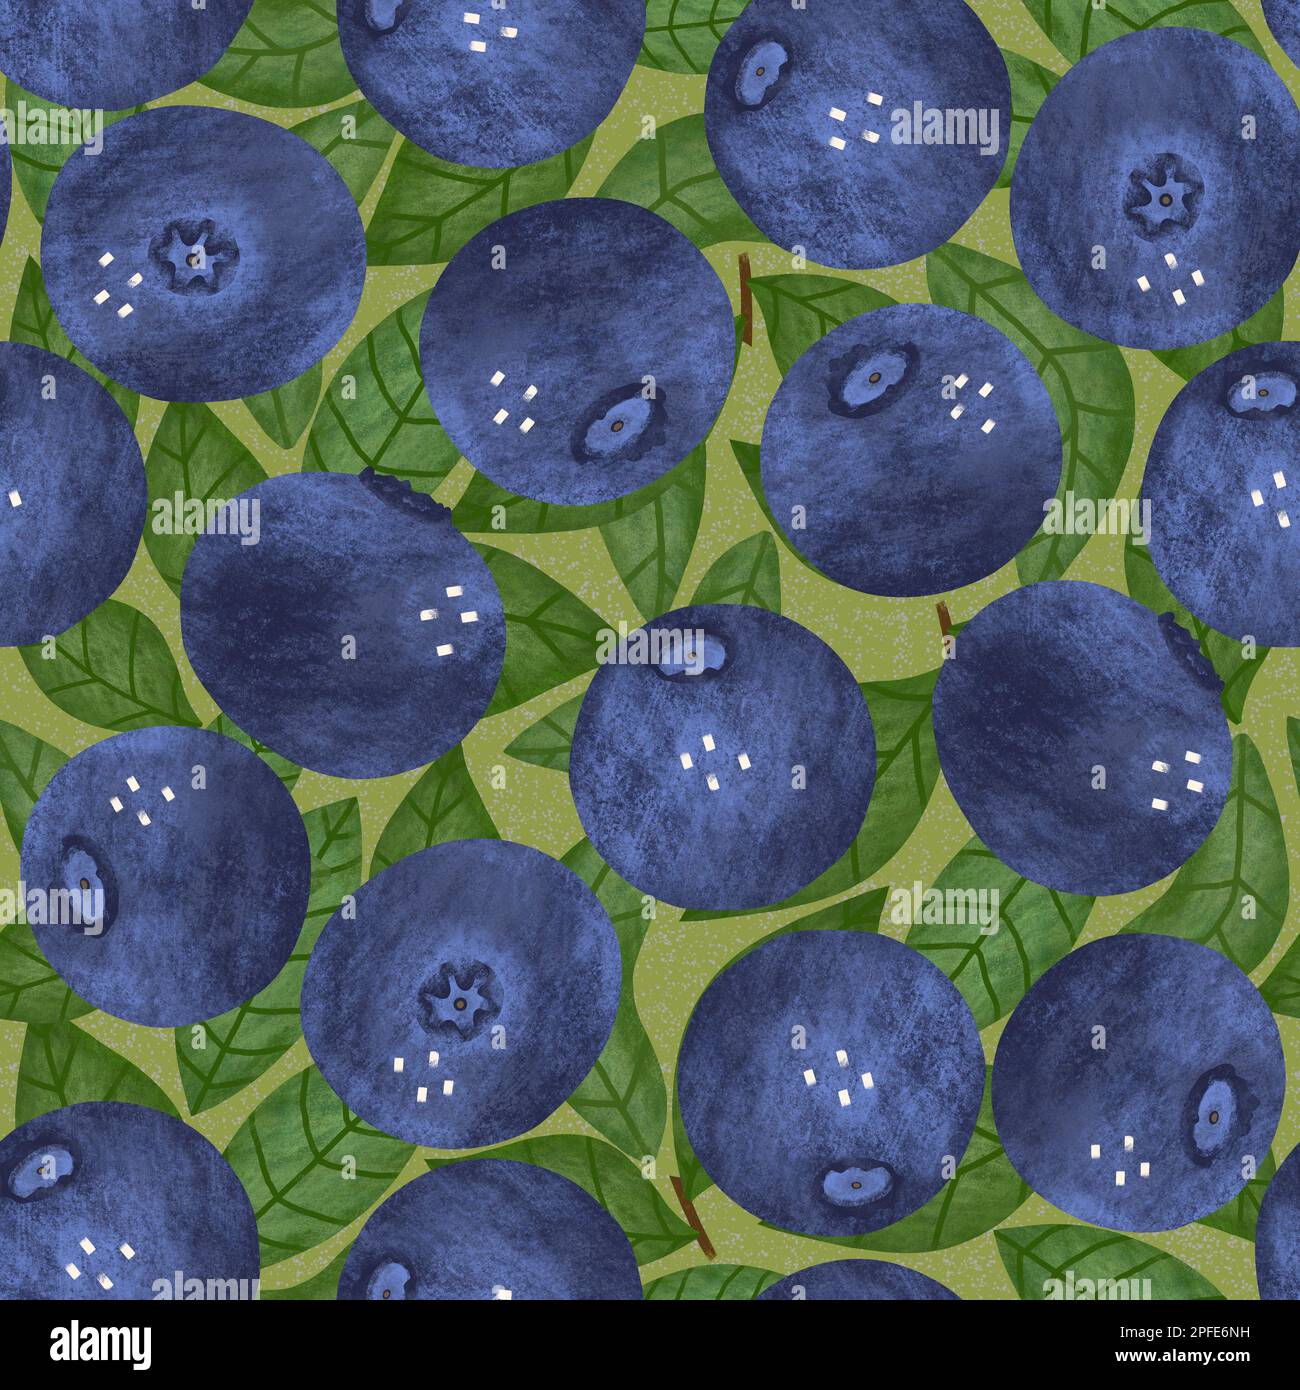 Blueberry seamless pattern. Hand drawn textured blackberry and leaves on green background. Blue berry allover print Stock Photo